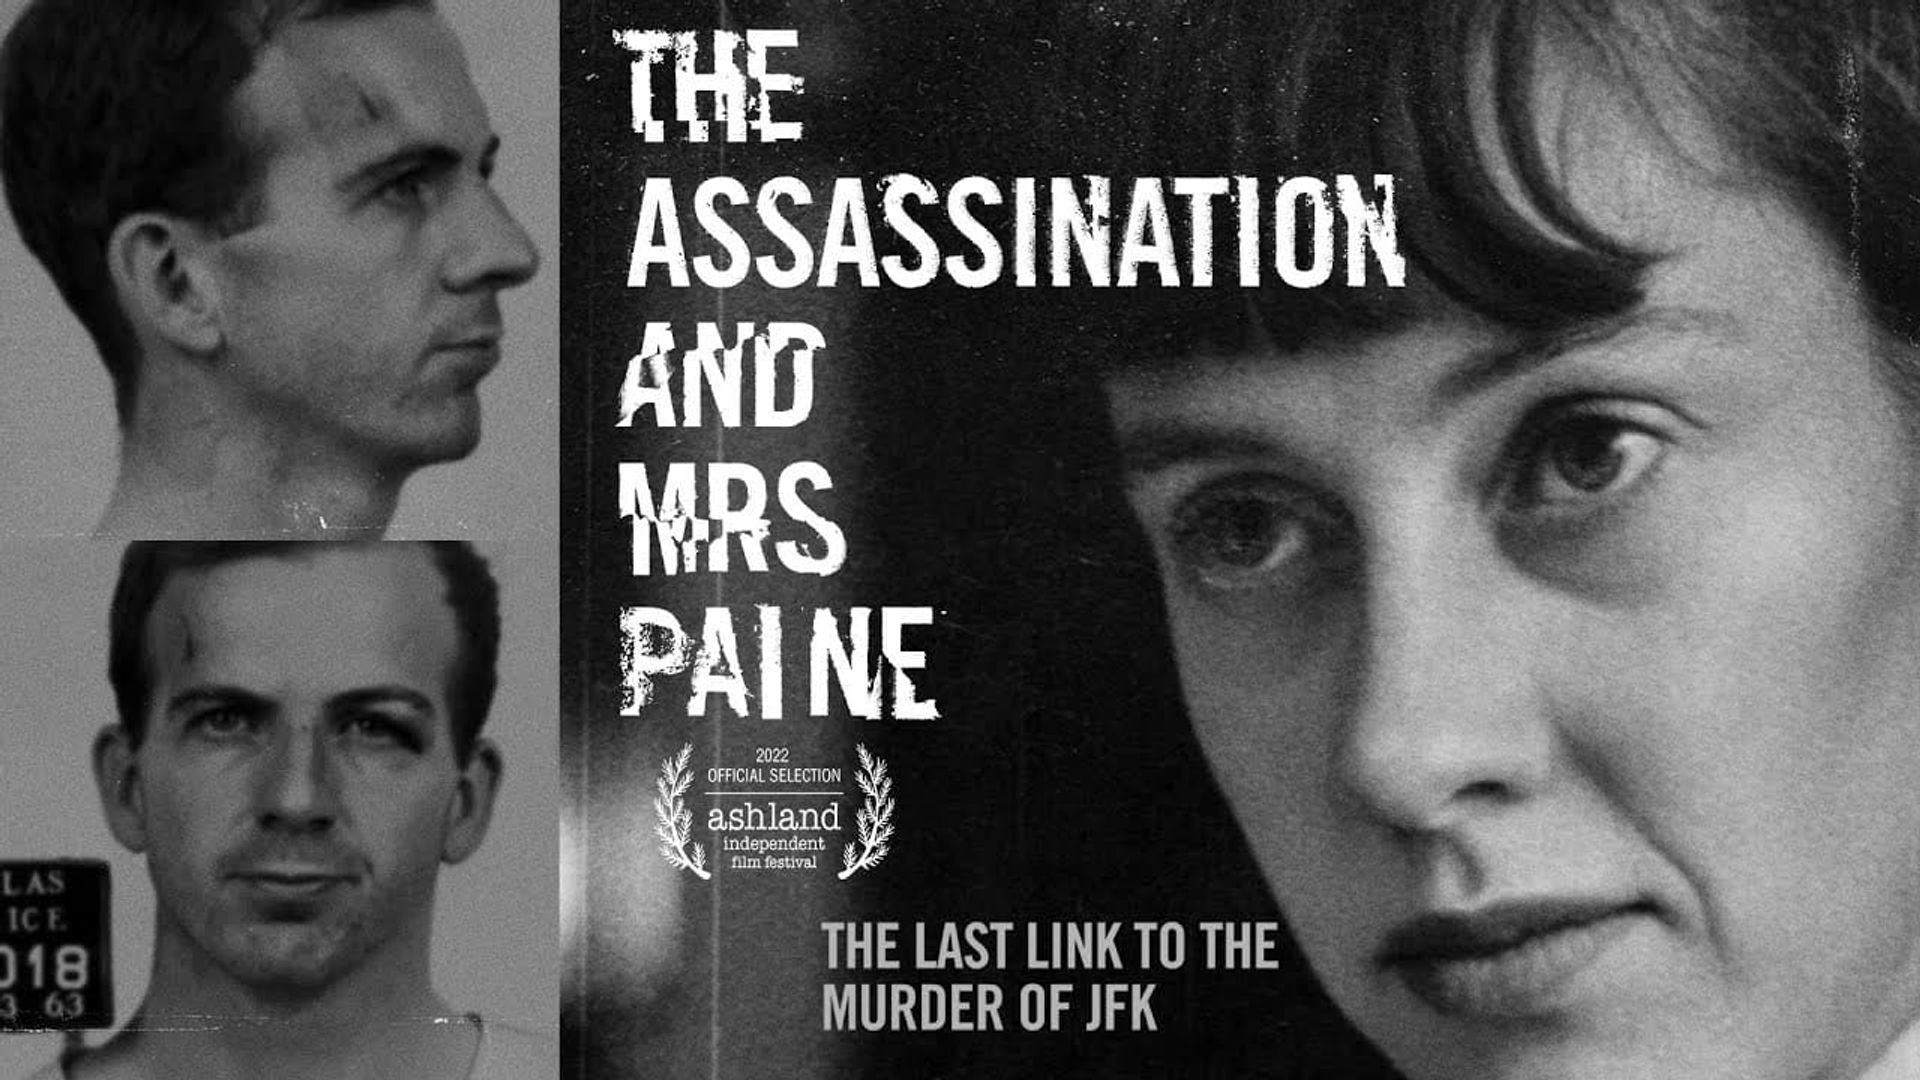 The Assassination & Mrs. Paine background